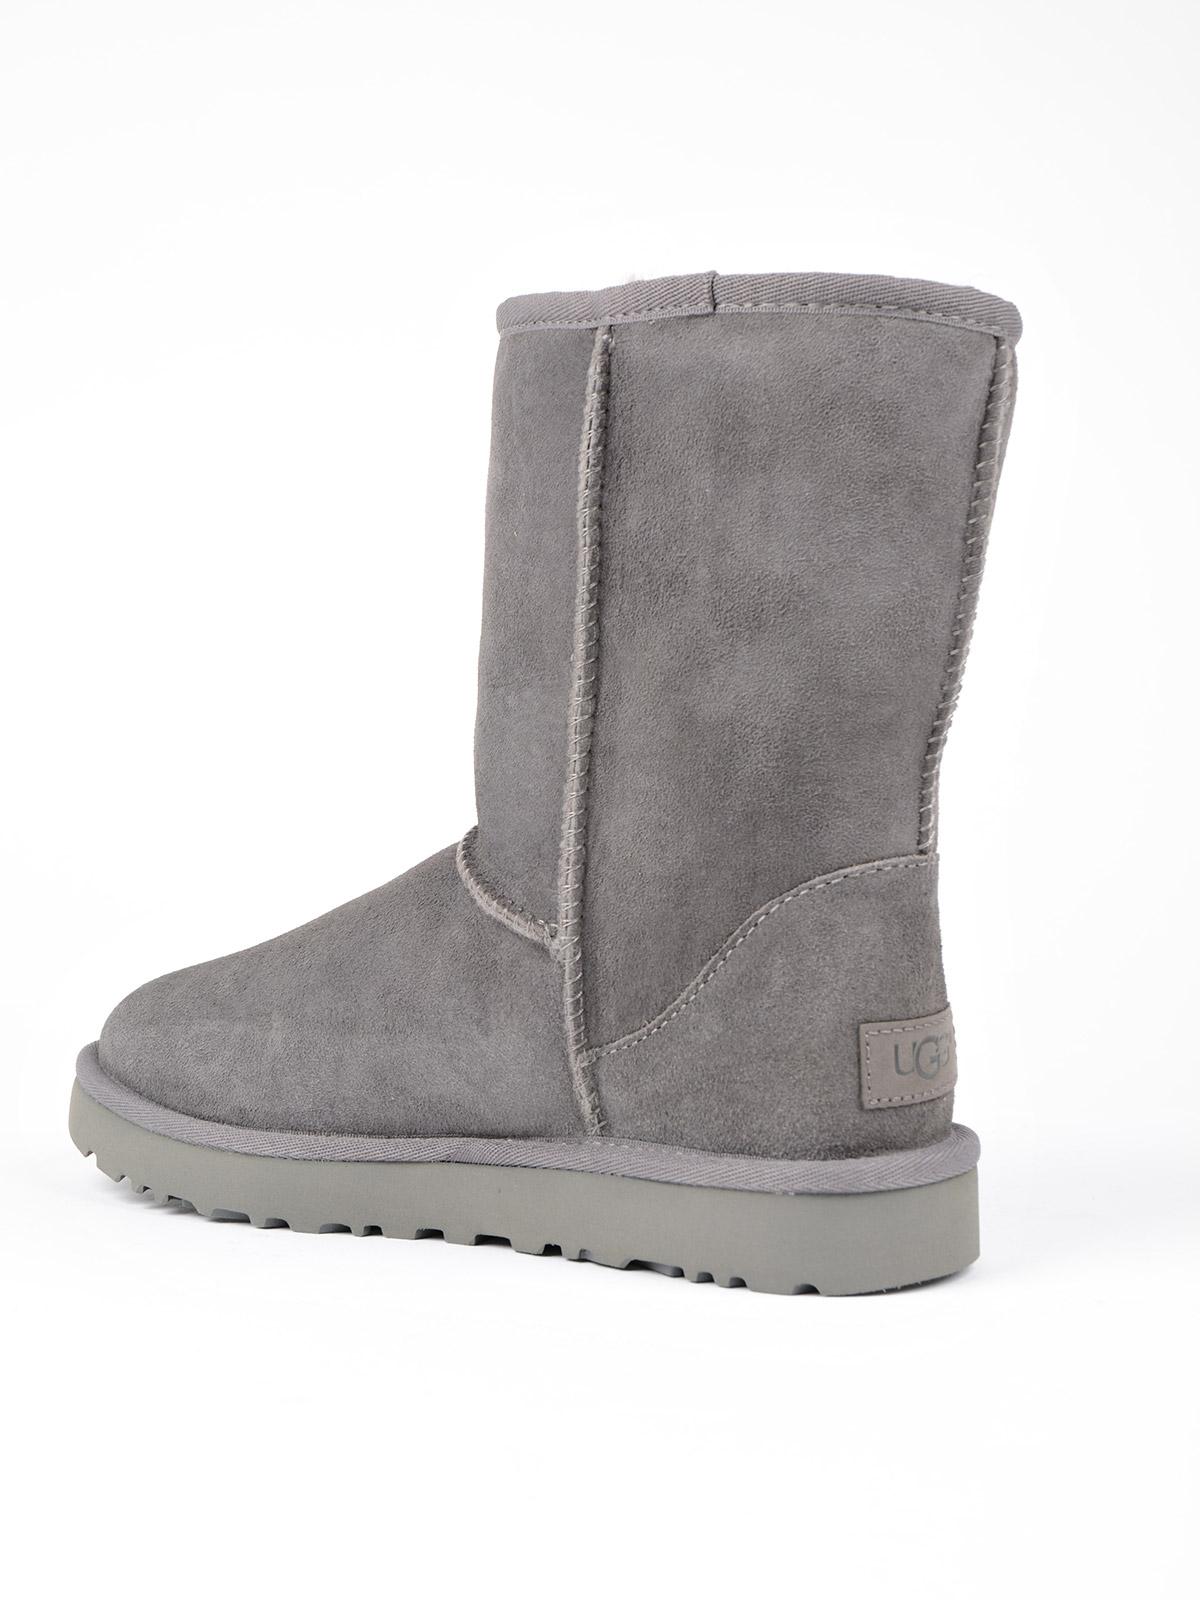 UGG Wool Classic Short Ii Boot in Grey (Gray) - Save 71% - Lyst